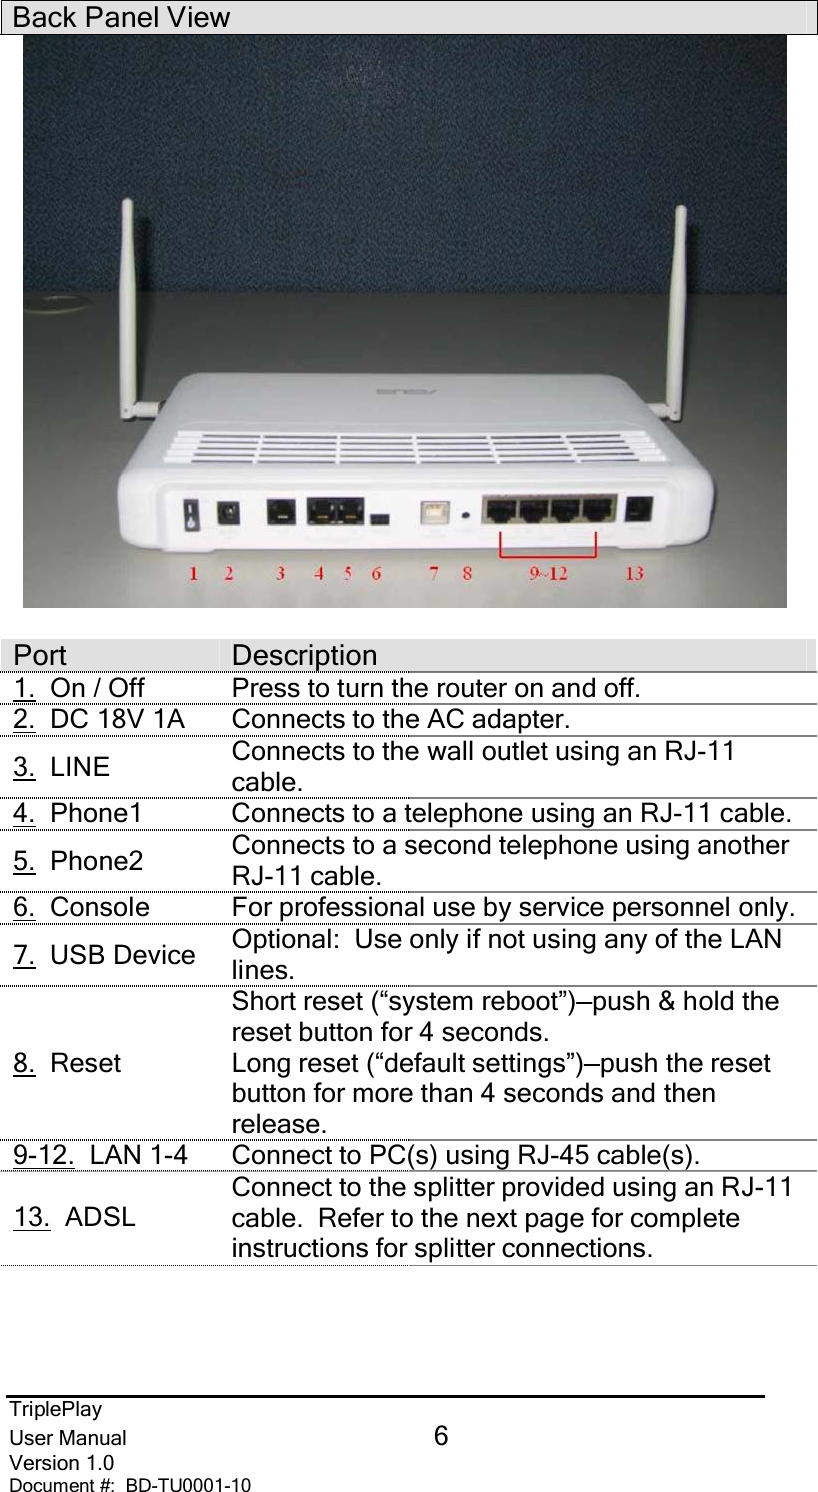 TriplePlayUser Manual 6Version 1.0Document #:  BD-TU0001-10Back Panel ViewPort Description1.   On / Off  Press to turn the router on and off.2.   DC 18V 1A  Connects to the AC adapter.3.  LINE Connects to the wall outlet using an RJ-11cable.4. Phone1  Connects to a telephone using an RJ-11 cable.5.  Phone2 Connects to a second telephone using anotherRJ-11 cable.6. Console For professional use by service personnel only.7.  USB Device Optional:  Use only if not using any of the LANlines.8.  ResetShort reset (“system reboot”)—push &amp; hold thereset button for 4 seconds.Long reset (“default settings”)—push the resetbutton for more than 4 seconds and thenrelease.9-12.  LAN 1-4  Connect to PC(s) using RJ-45 cable(s).13.  ADSLConnect to the splitter provided using an RJ-11cable.  Refer to the next page for completeinstructions for splitter connections.